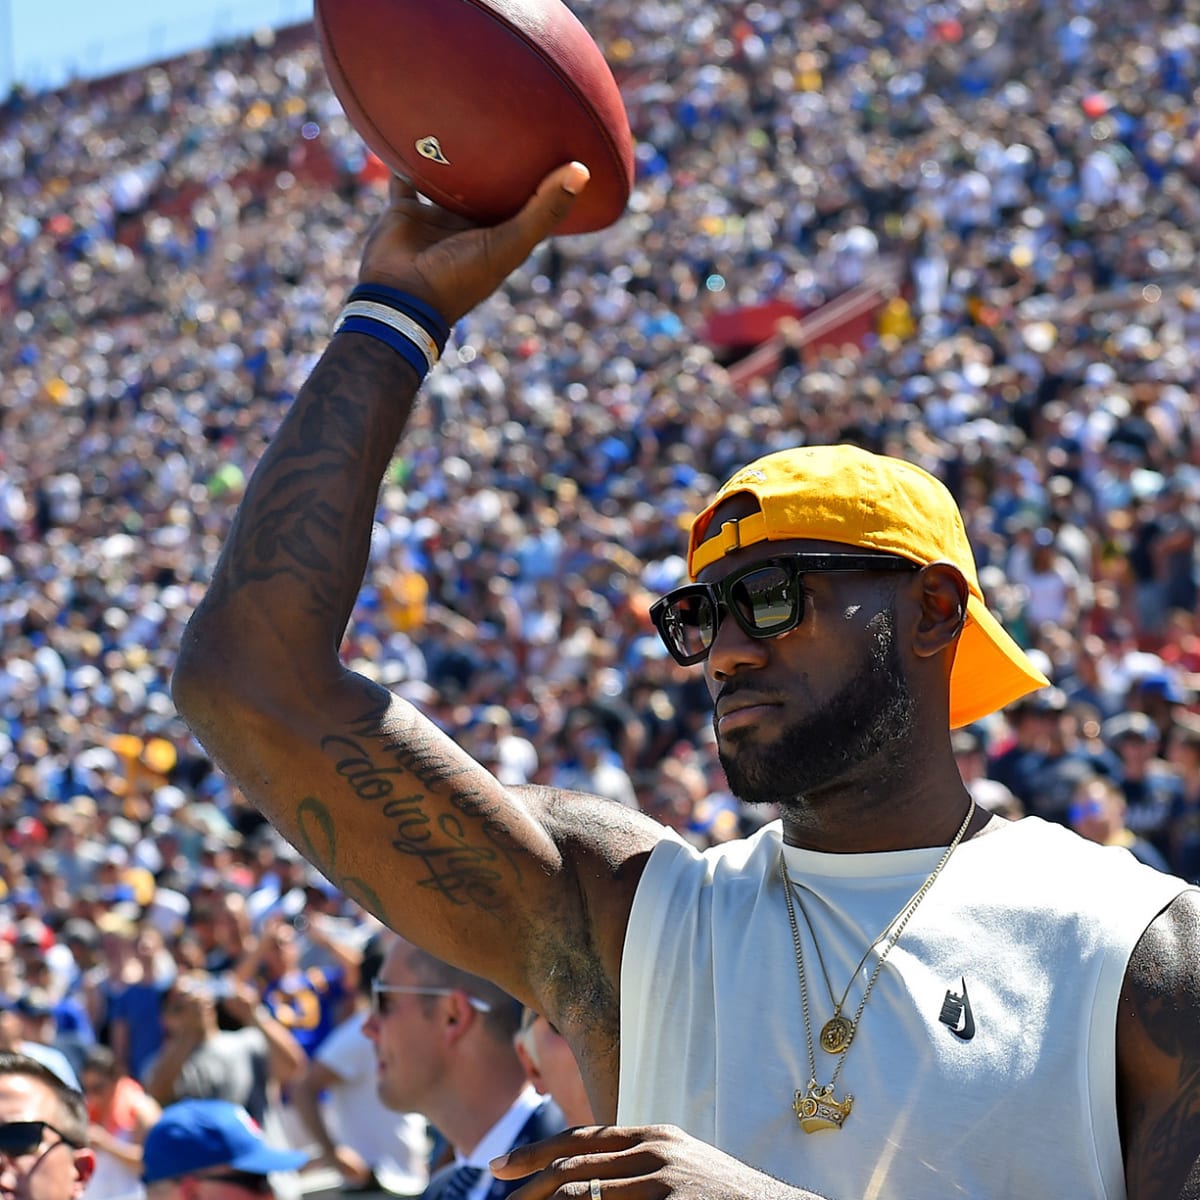 Sight of LeBron James in a football uniform reinforces he'd fit in just  fine on a NFL field